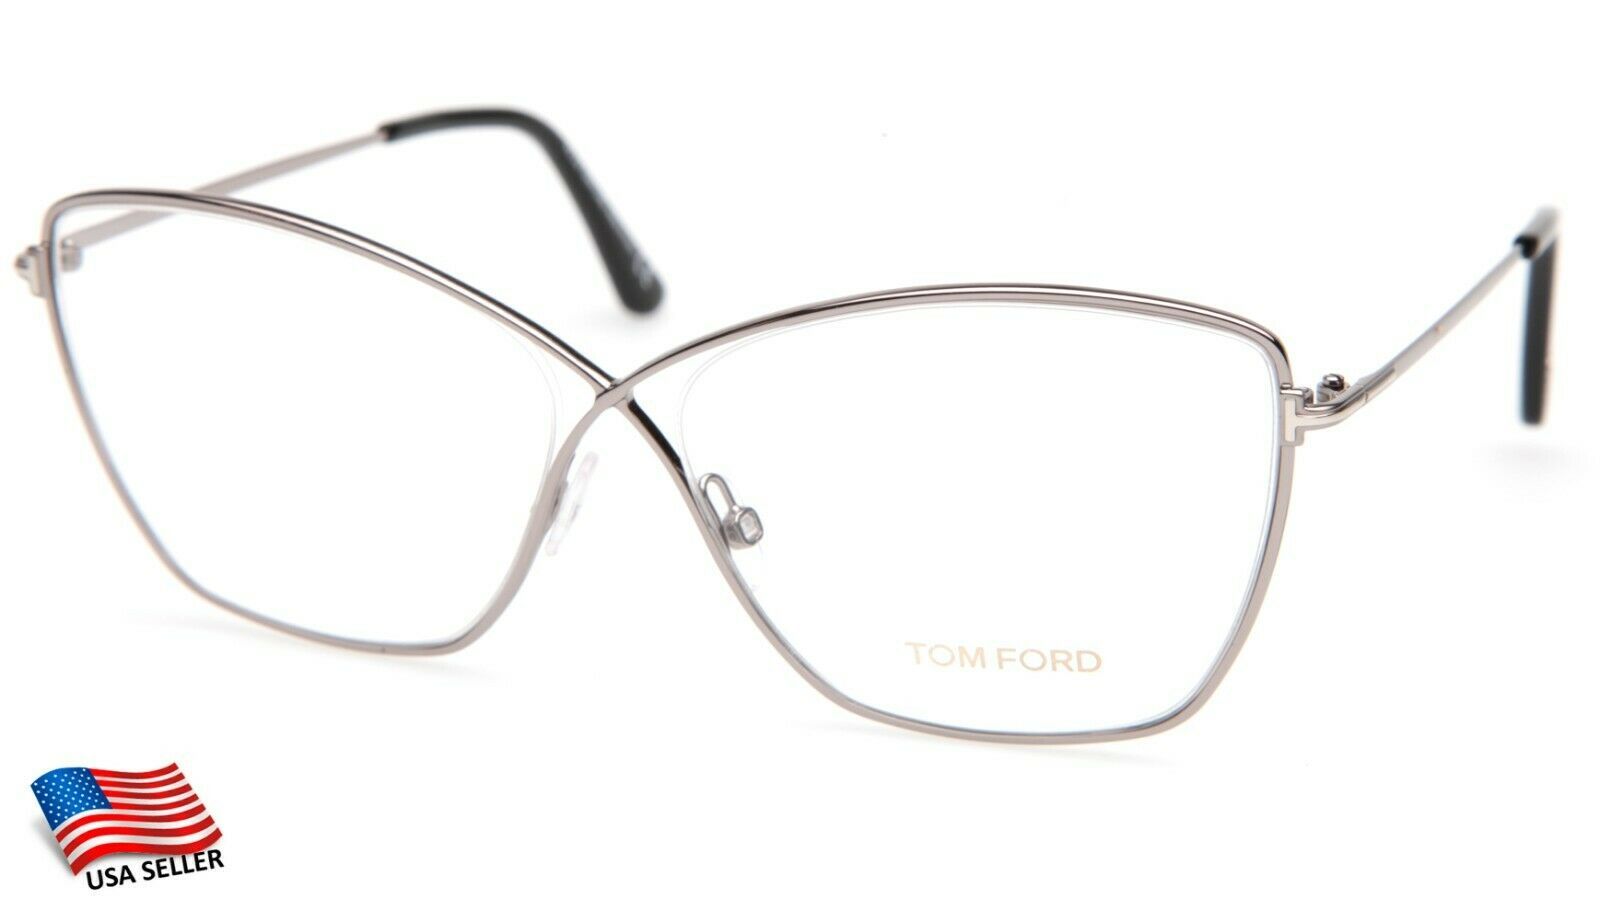 Primary image for NEW TOM FORD TF 5518 014 SILVER EYEGLASSES FRAME 57-13-140mm 47mm Italy